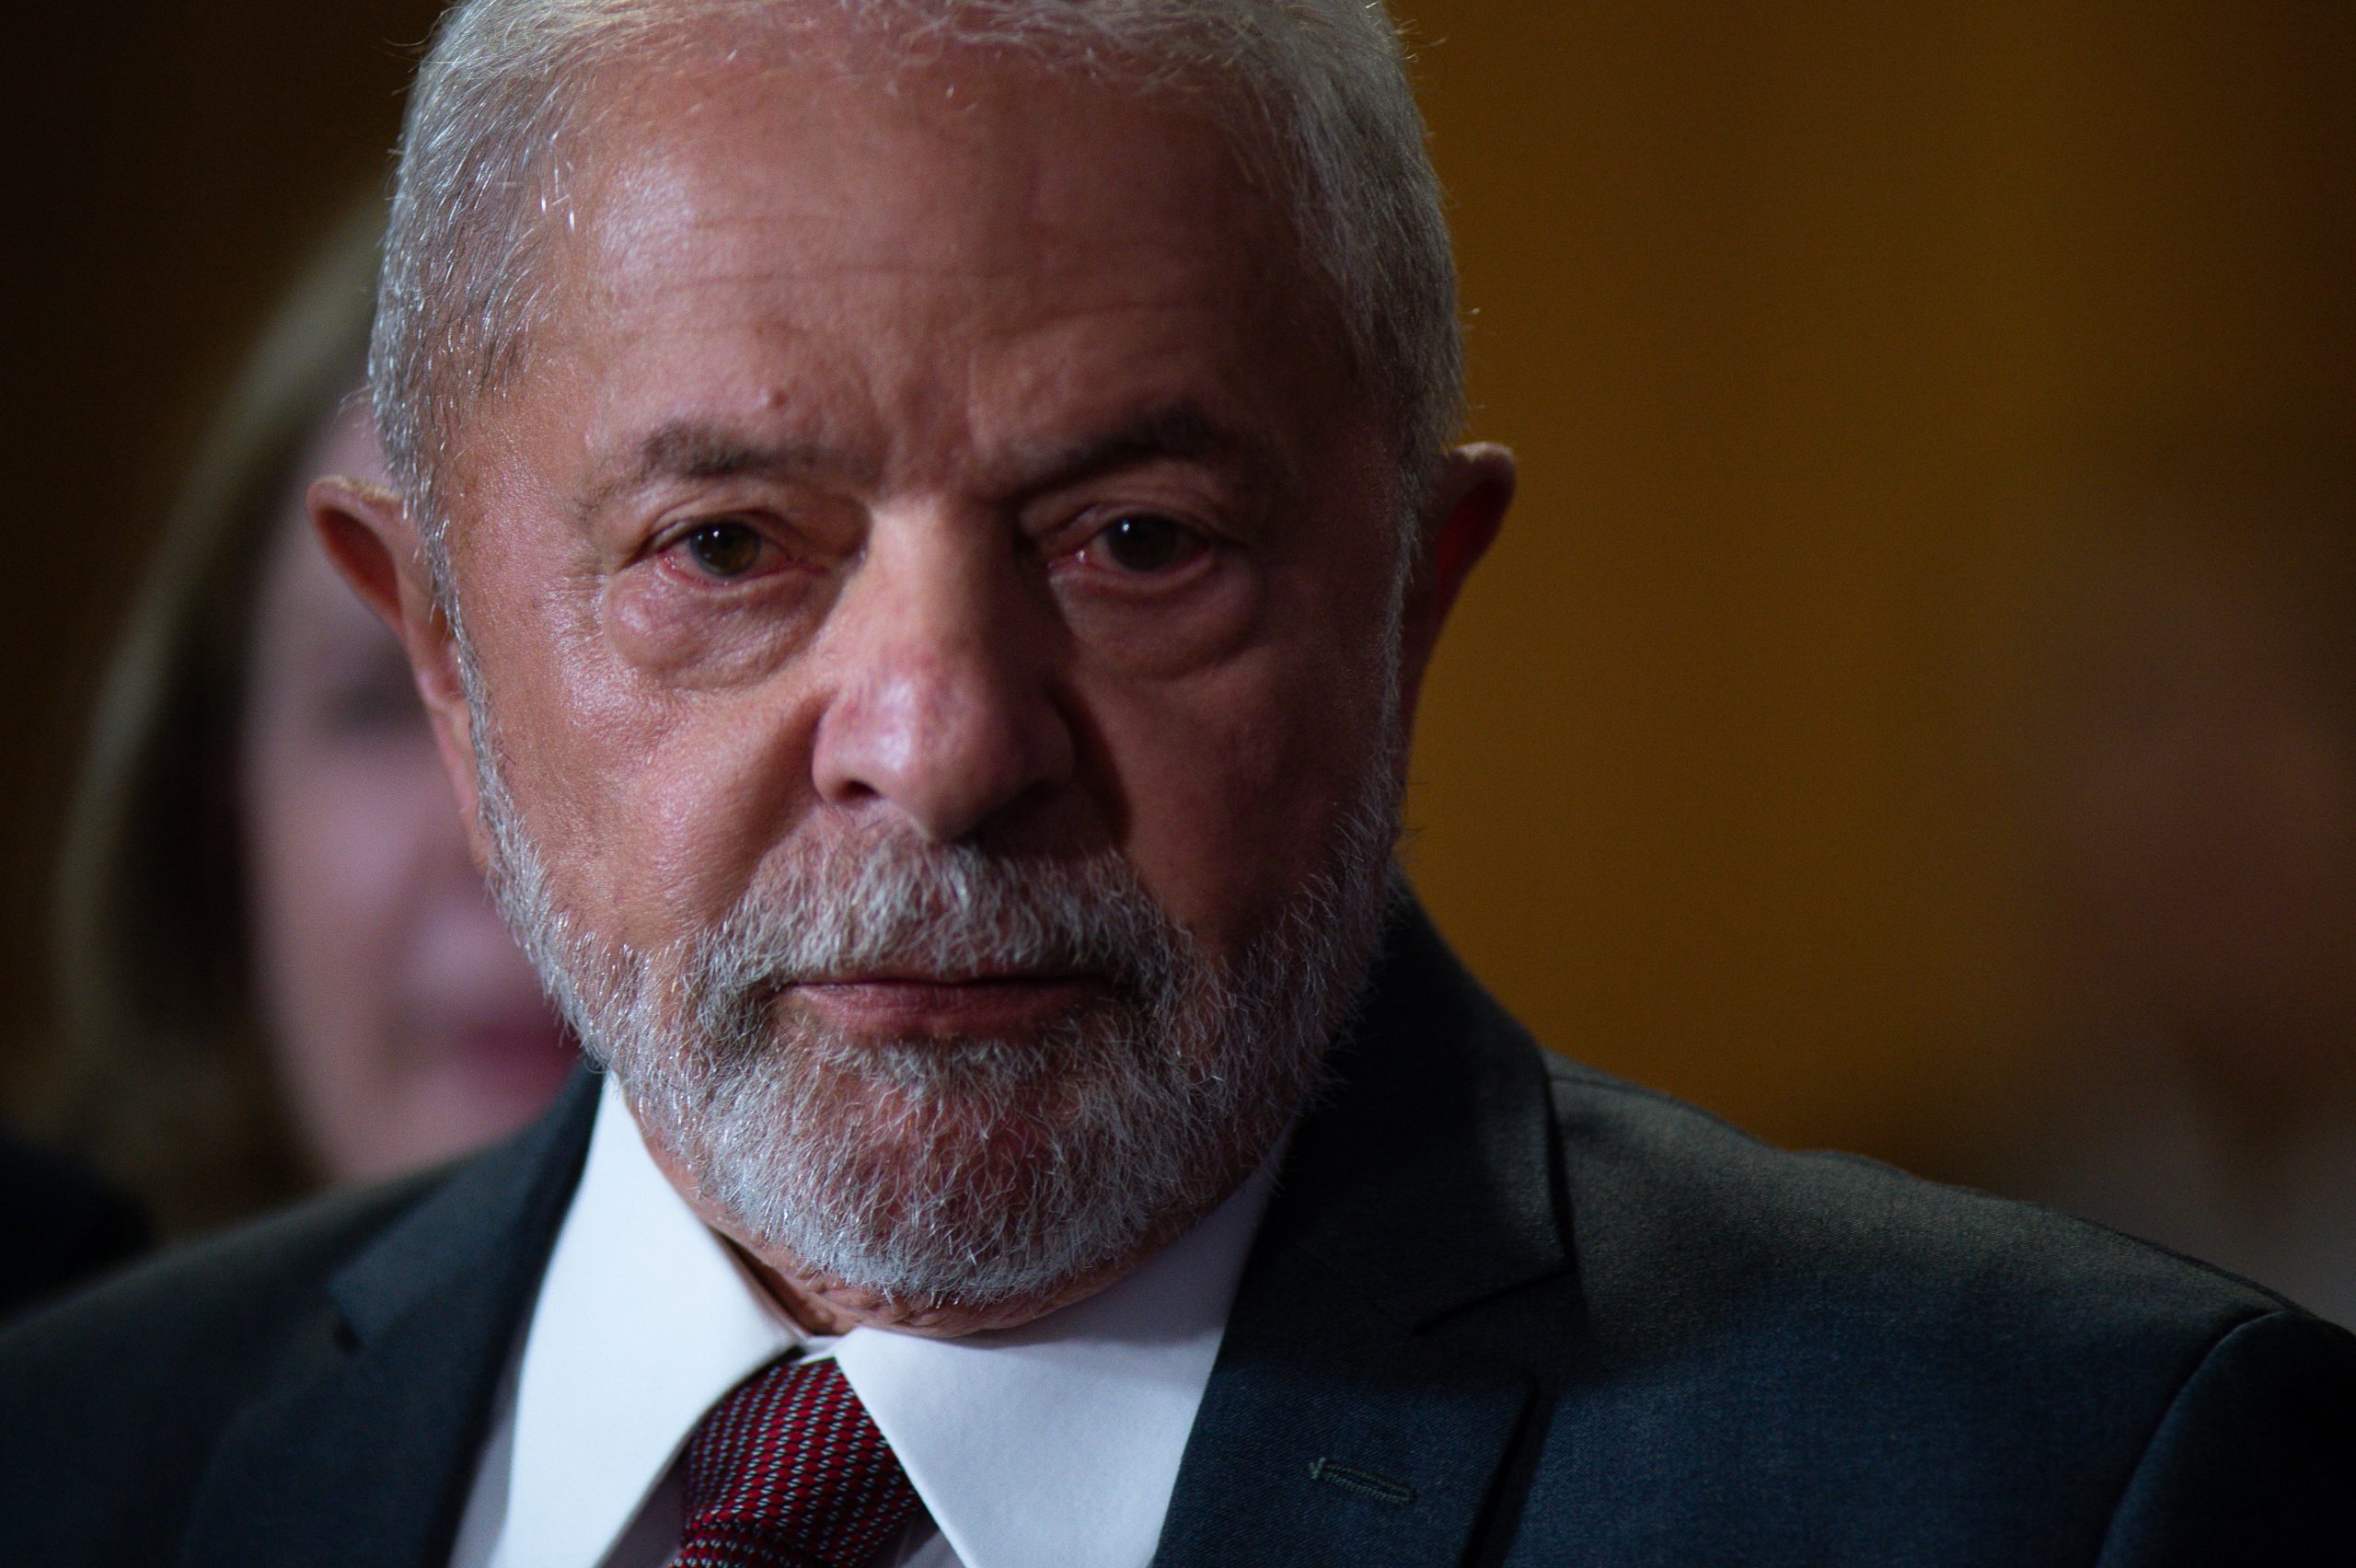 Close up shot of Brazilian president Lula da Silva, who's wearing a white shirt, a tie, and a dark suit.